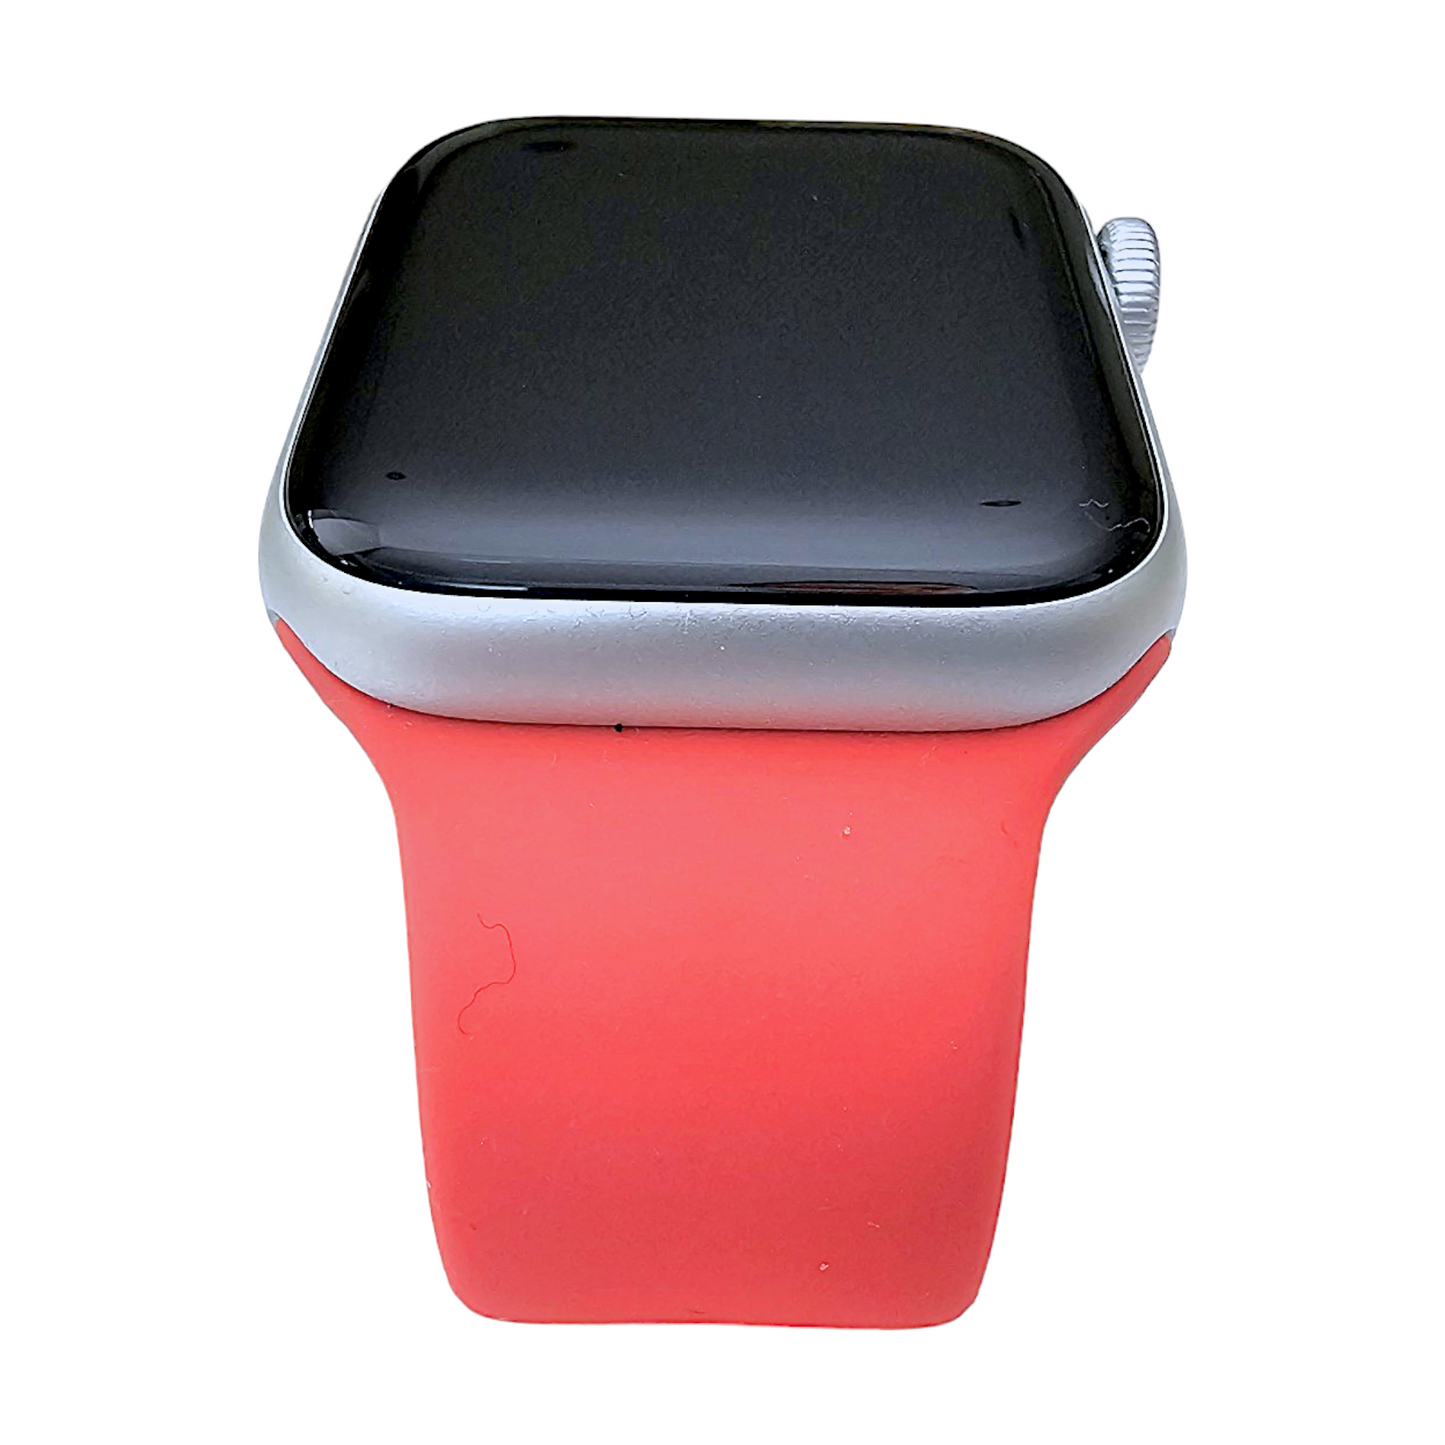 Soft Silicone Watch Strap For Apple Watch Red